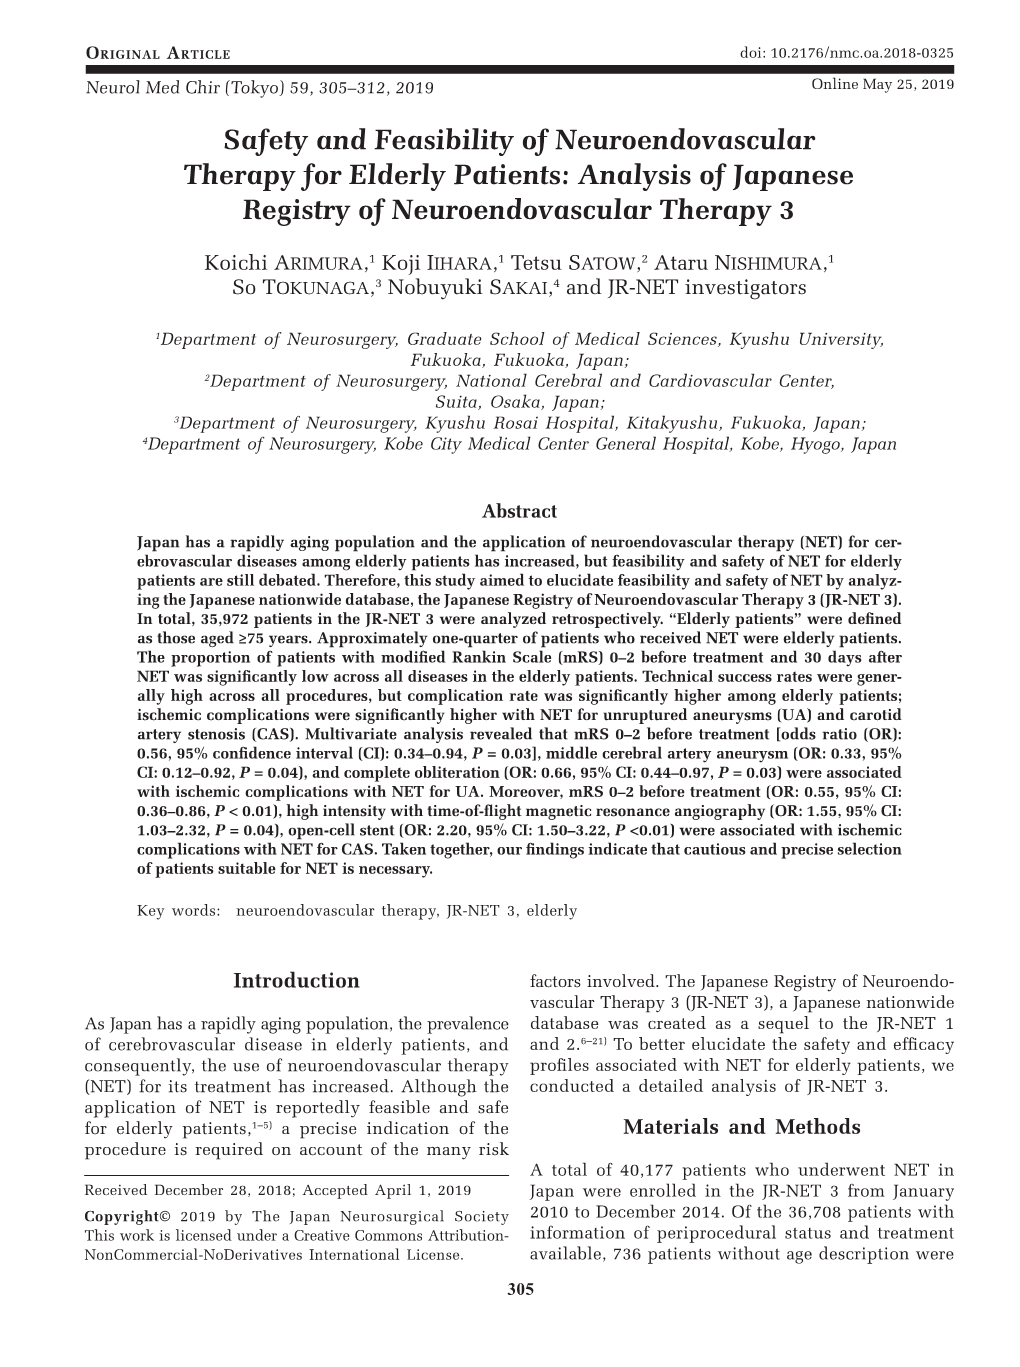 Safety and Feasibility of Neuroendovascular Therapy for Elderly Patients: Analysis of Japanese Registry of Neuroendovascular Therapy 3